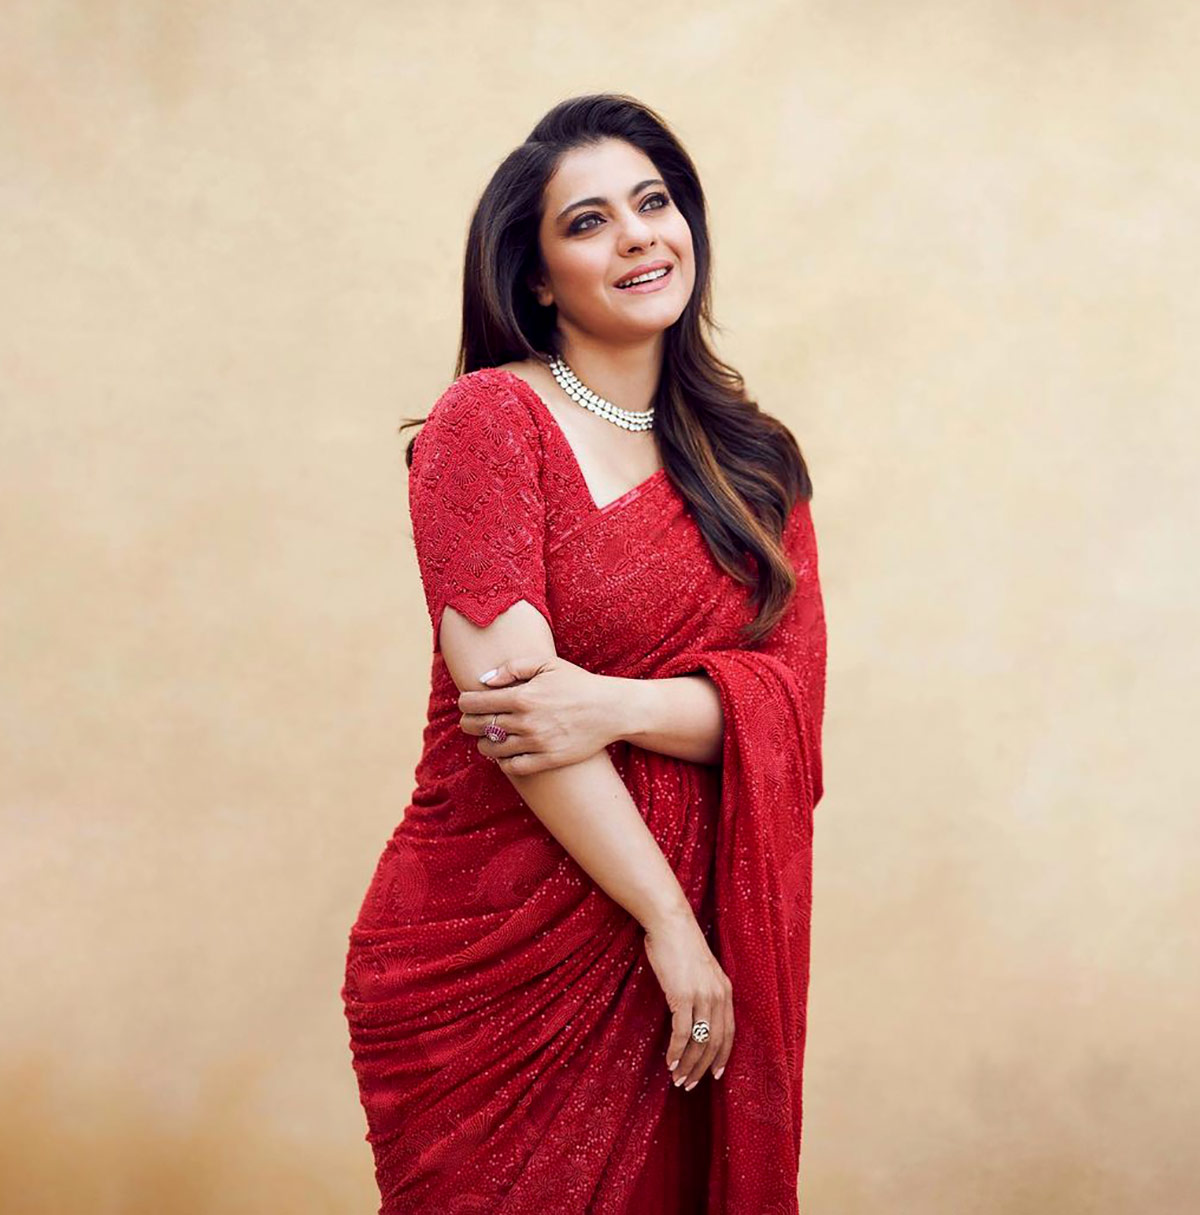 Find Out What Kajol Learnt After 30 Years